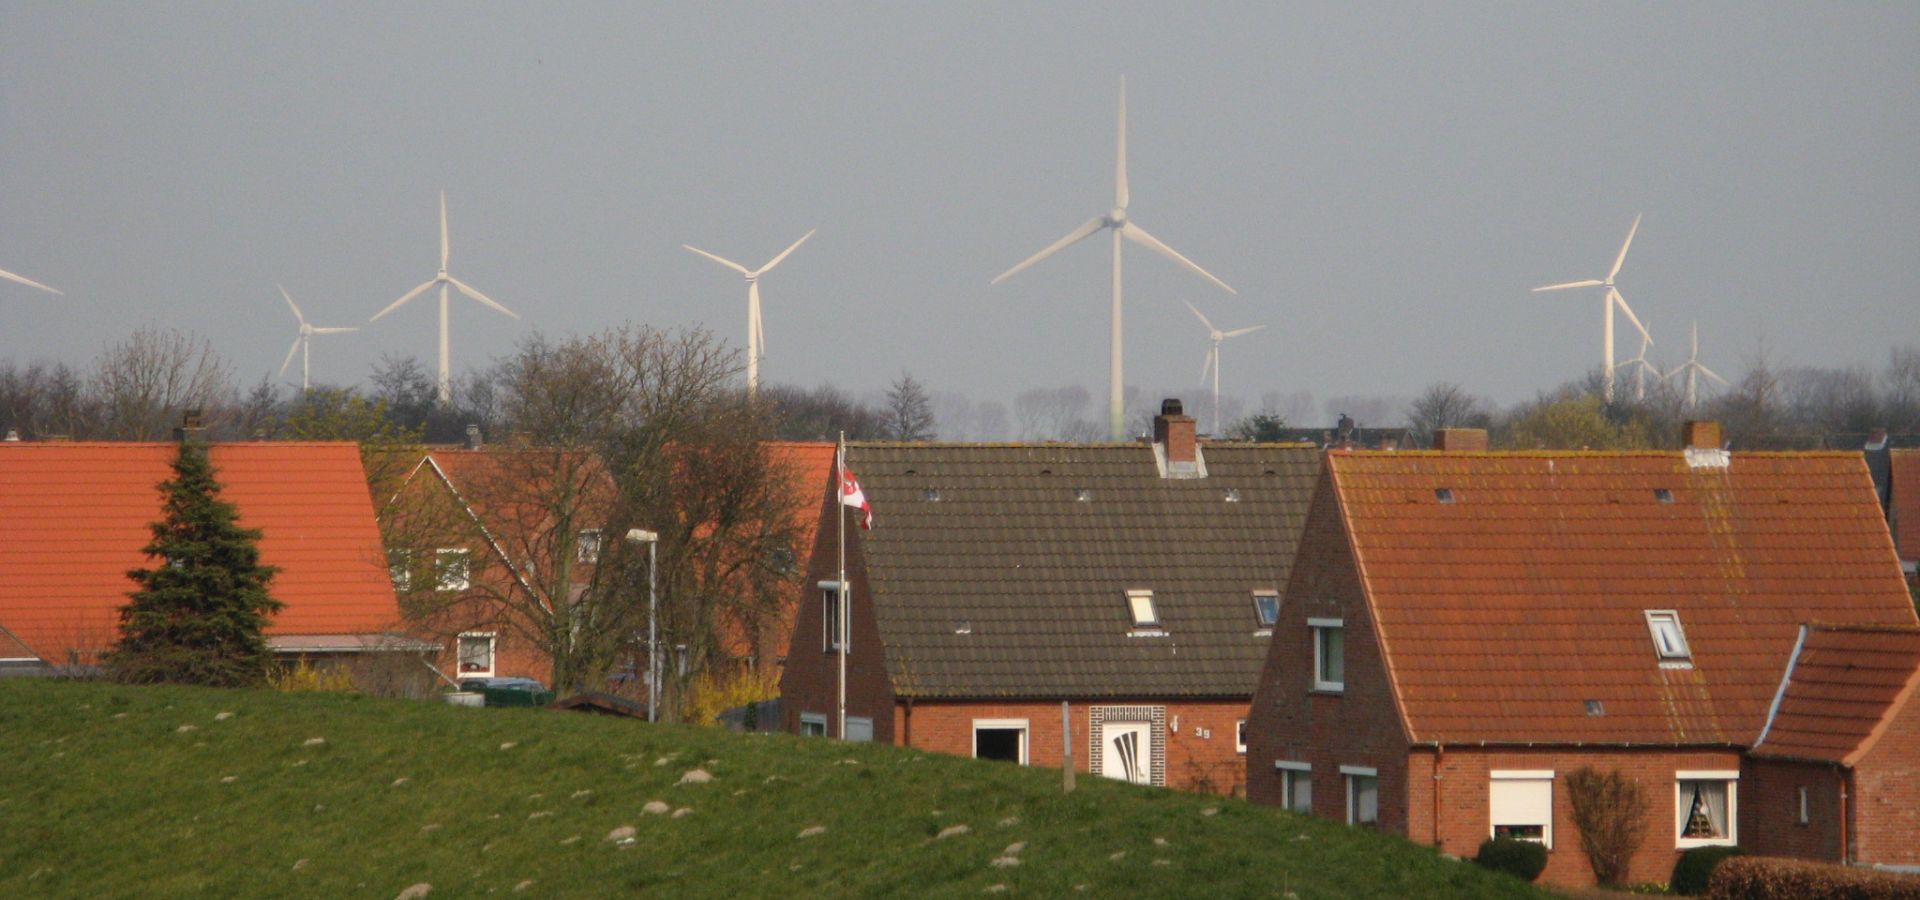 small red brick houses with windmills in the background